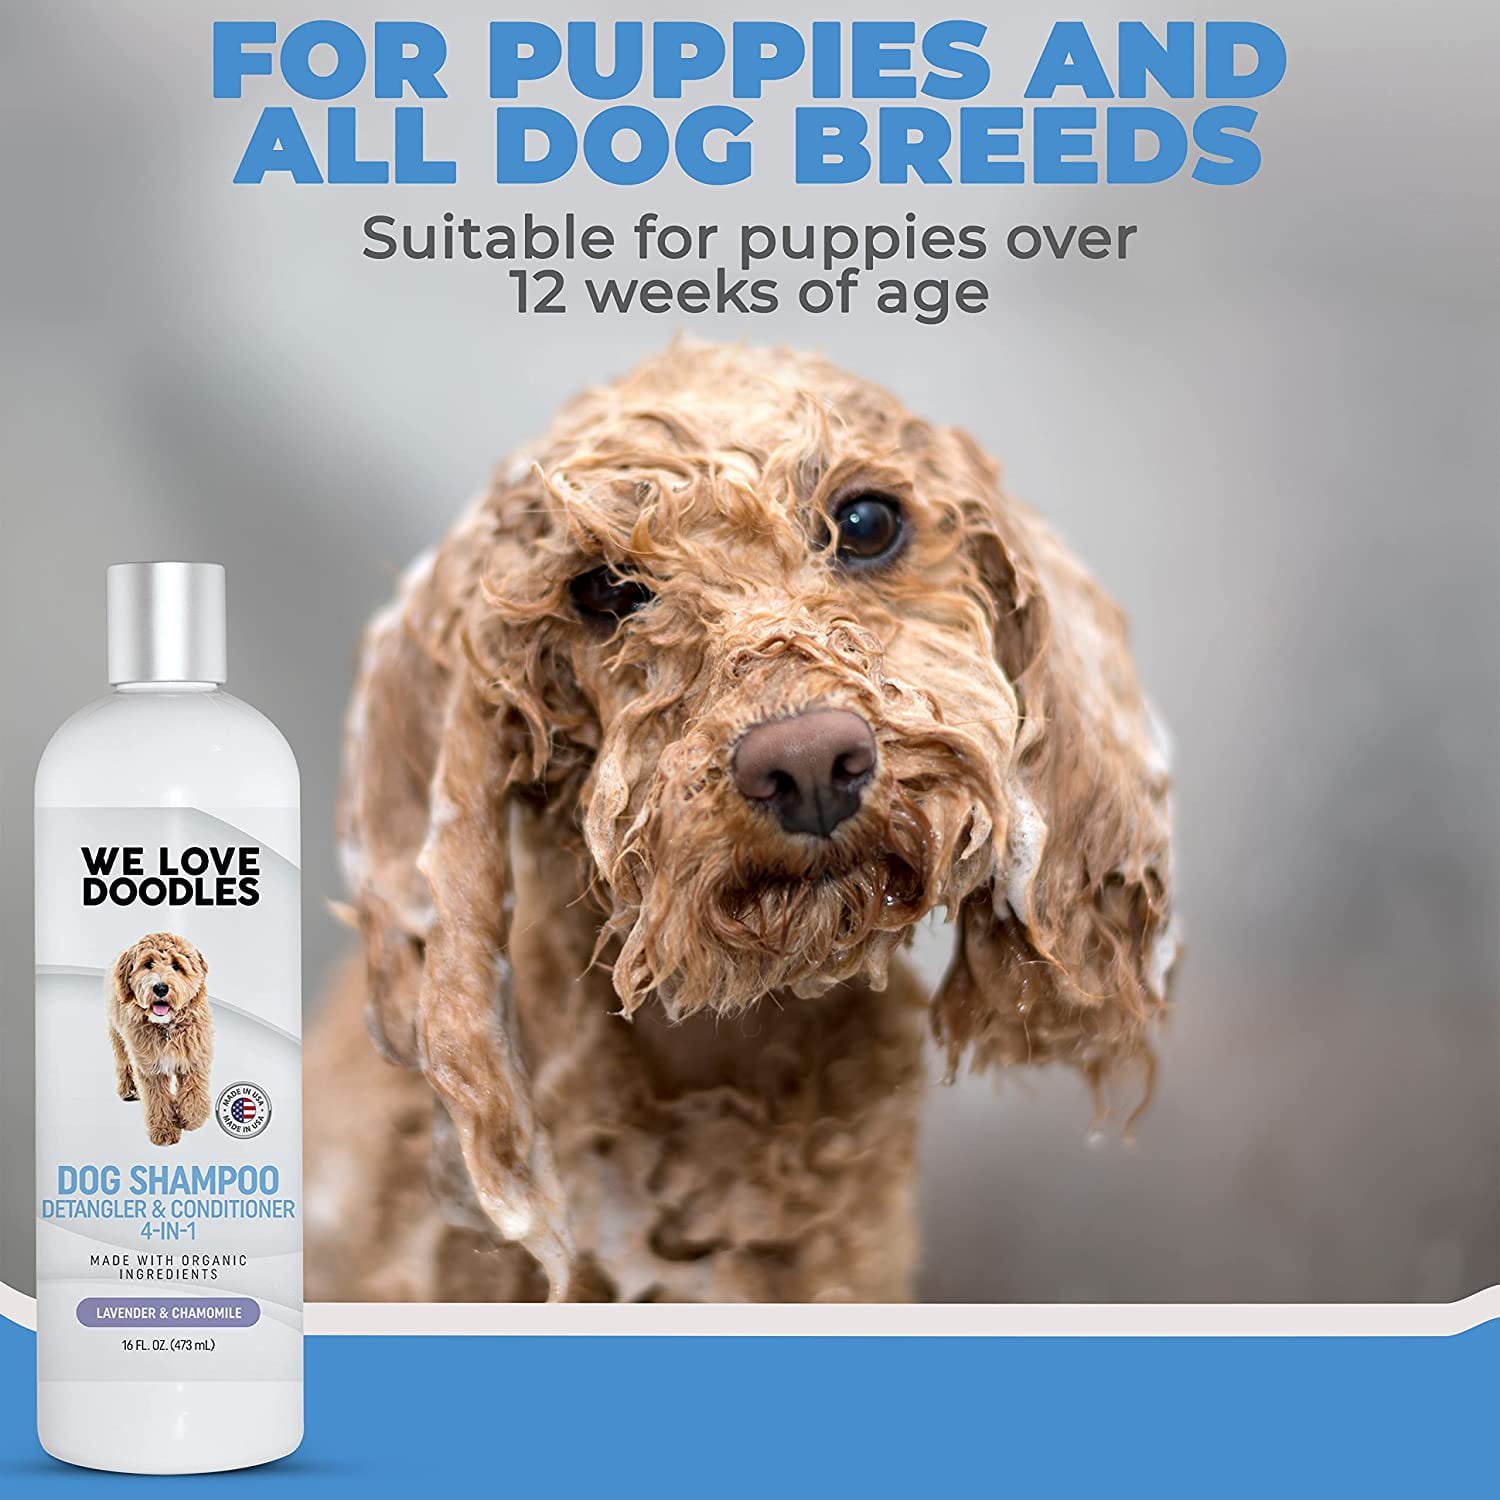 We Love Doodles, Dog Shampoo, Conditioner and Detangler, Best Shampoo for Goldendoodles and Doodles, Shampoo for Puppies, Grooming, Organic Ingredients, Lavender, Moisturizing, Best Smelling -